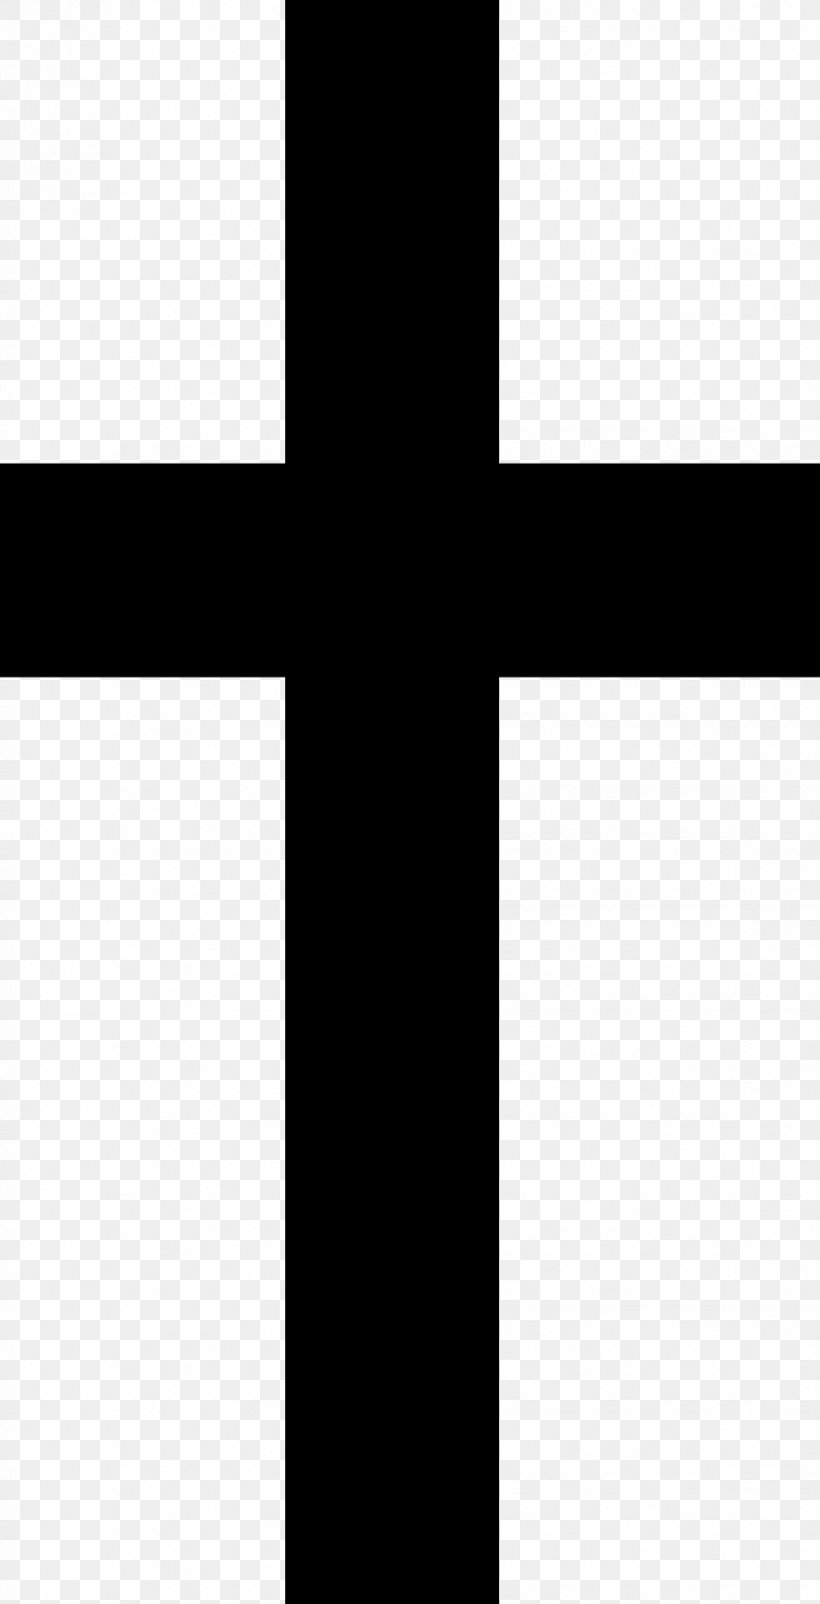 Christian Cross Clip Art, PNG, 981x1920px, Christian Cross, Black, Black And White, Christianity, Cross Download Free